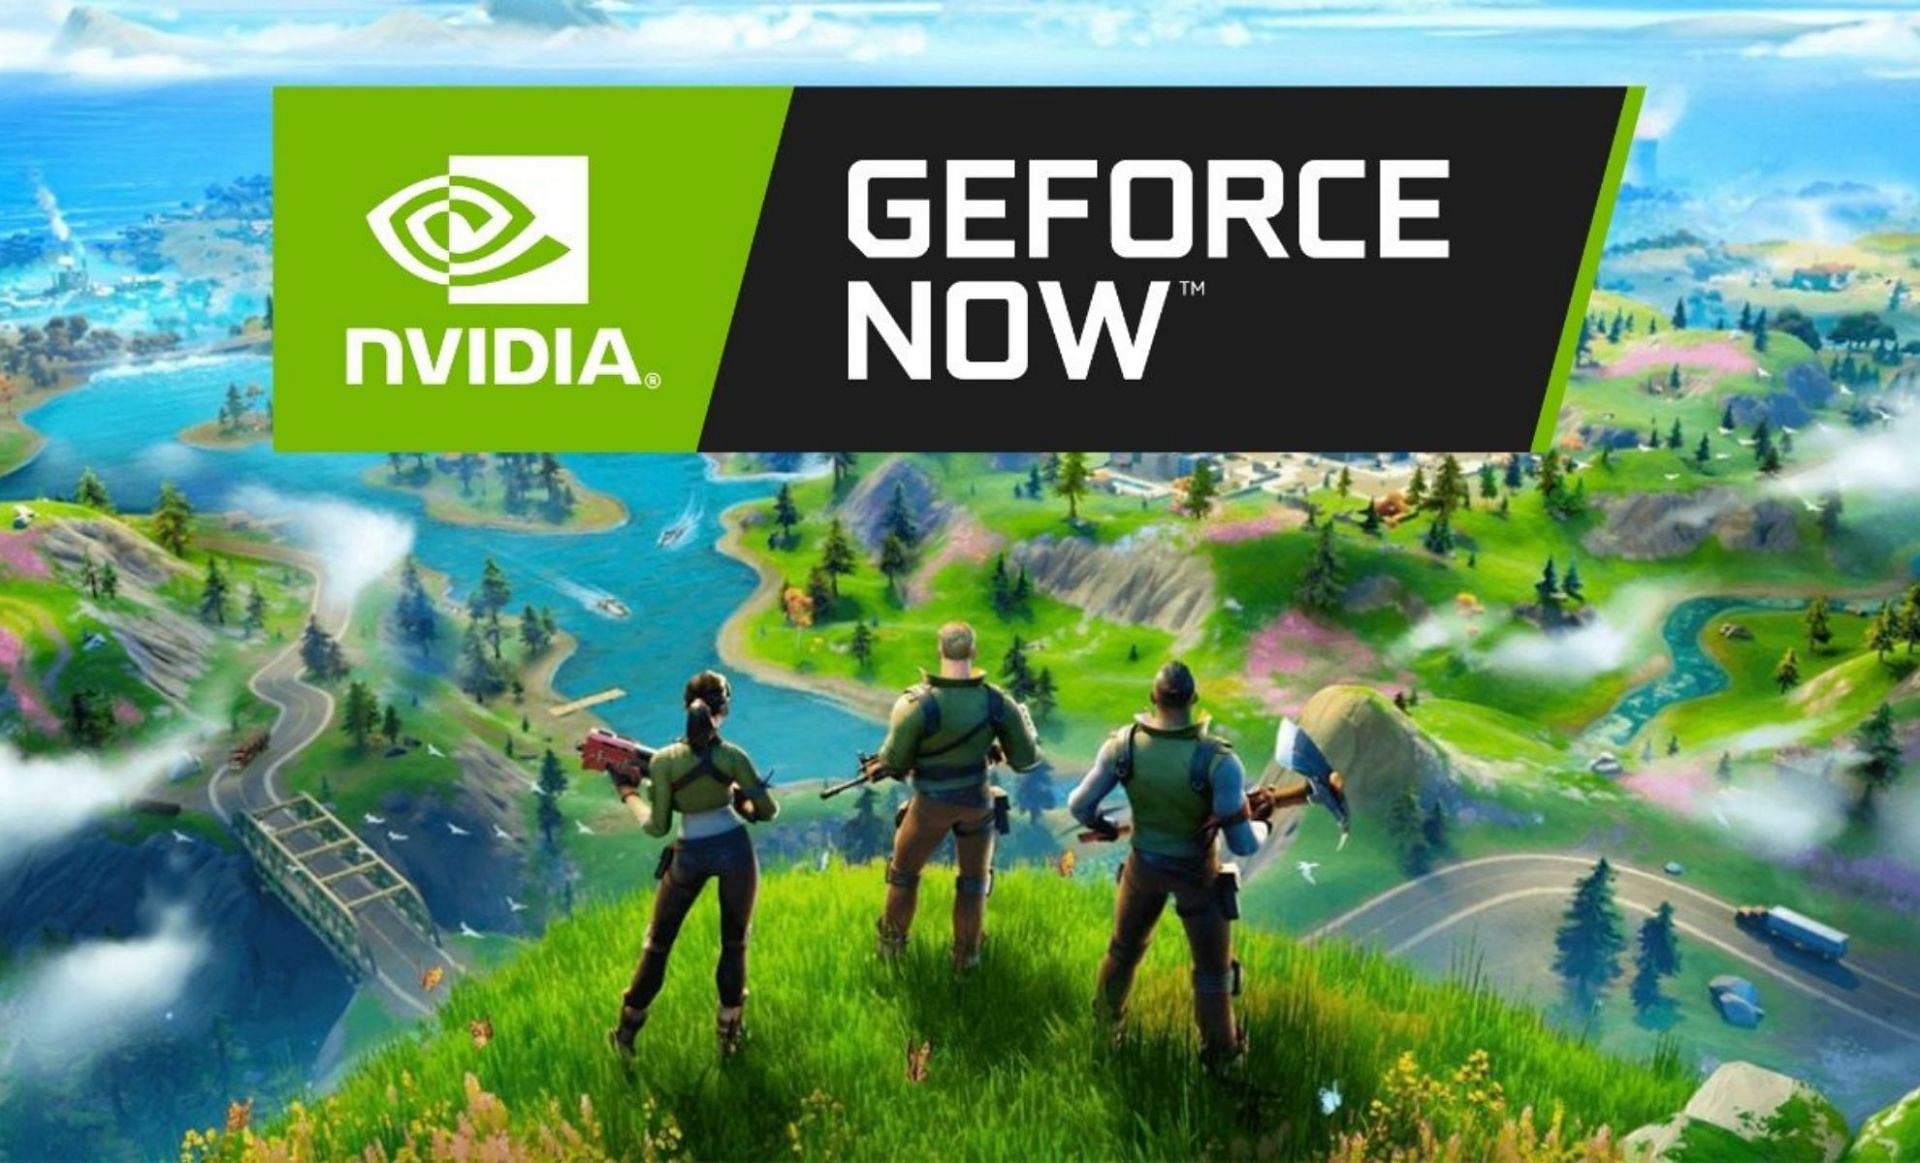 Play Fortnite on iPhone with GeForce Now